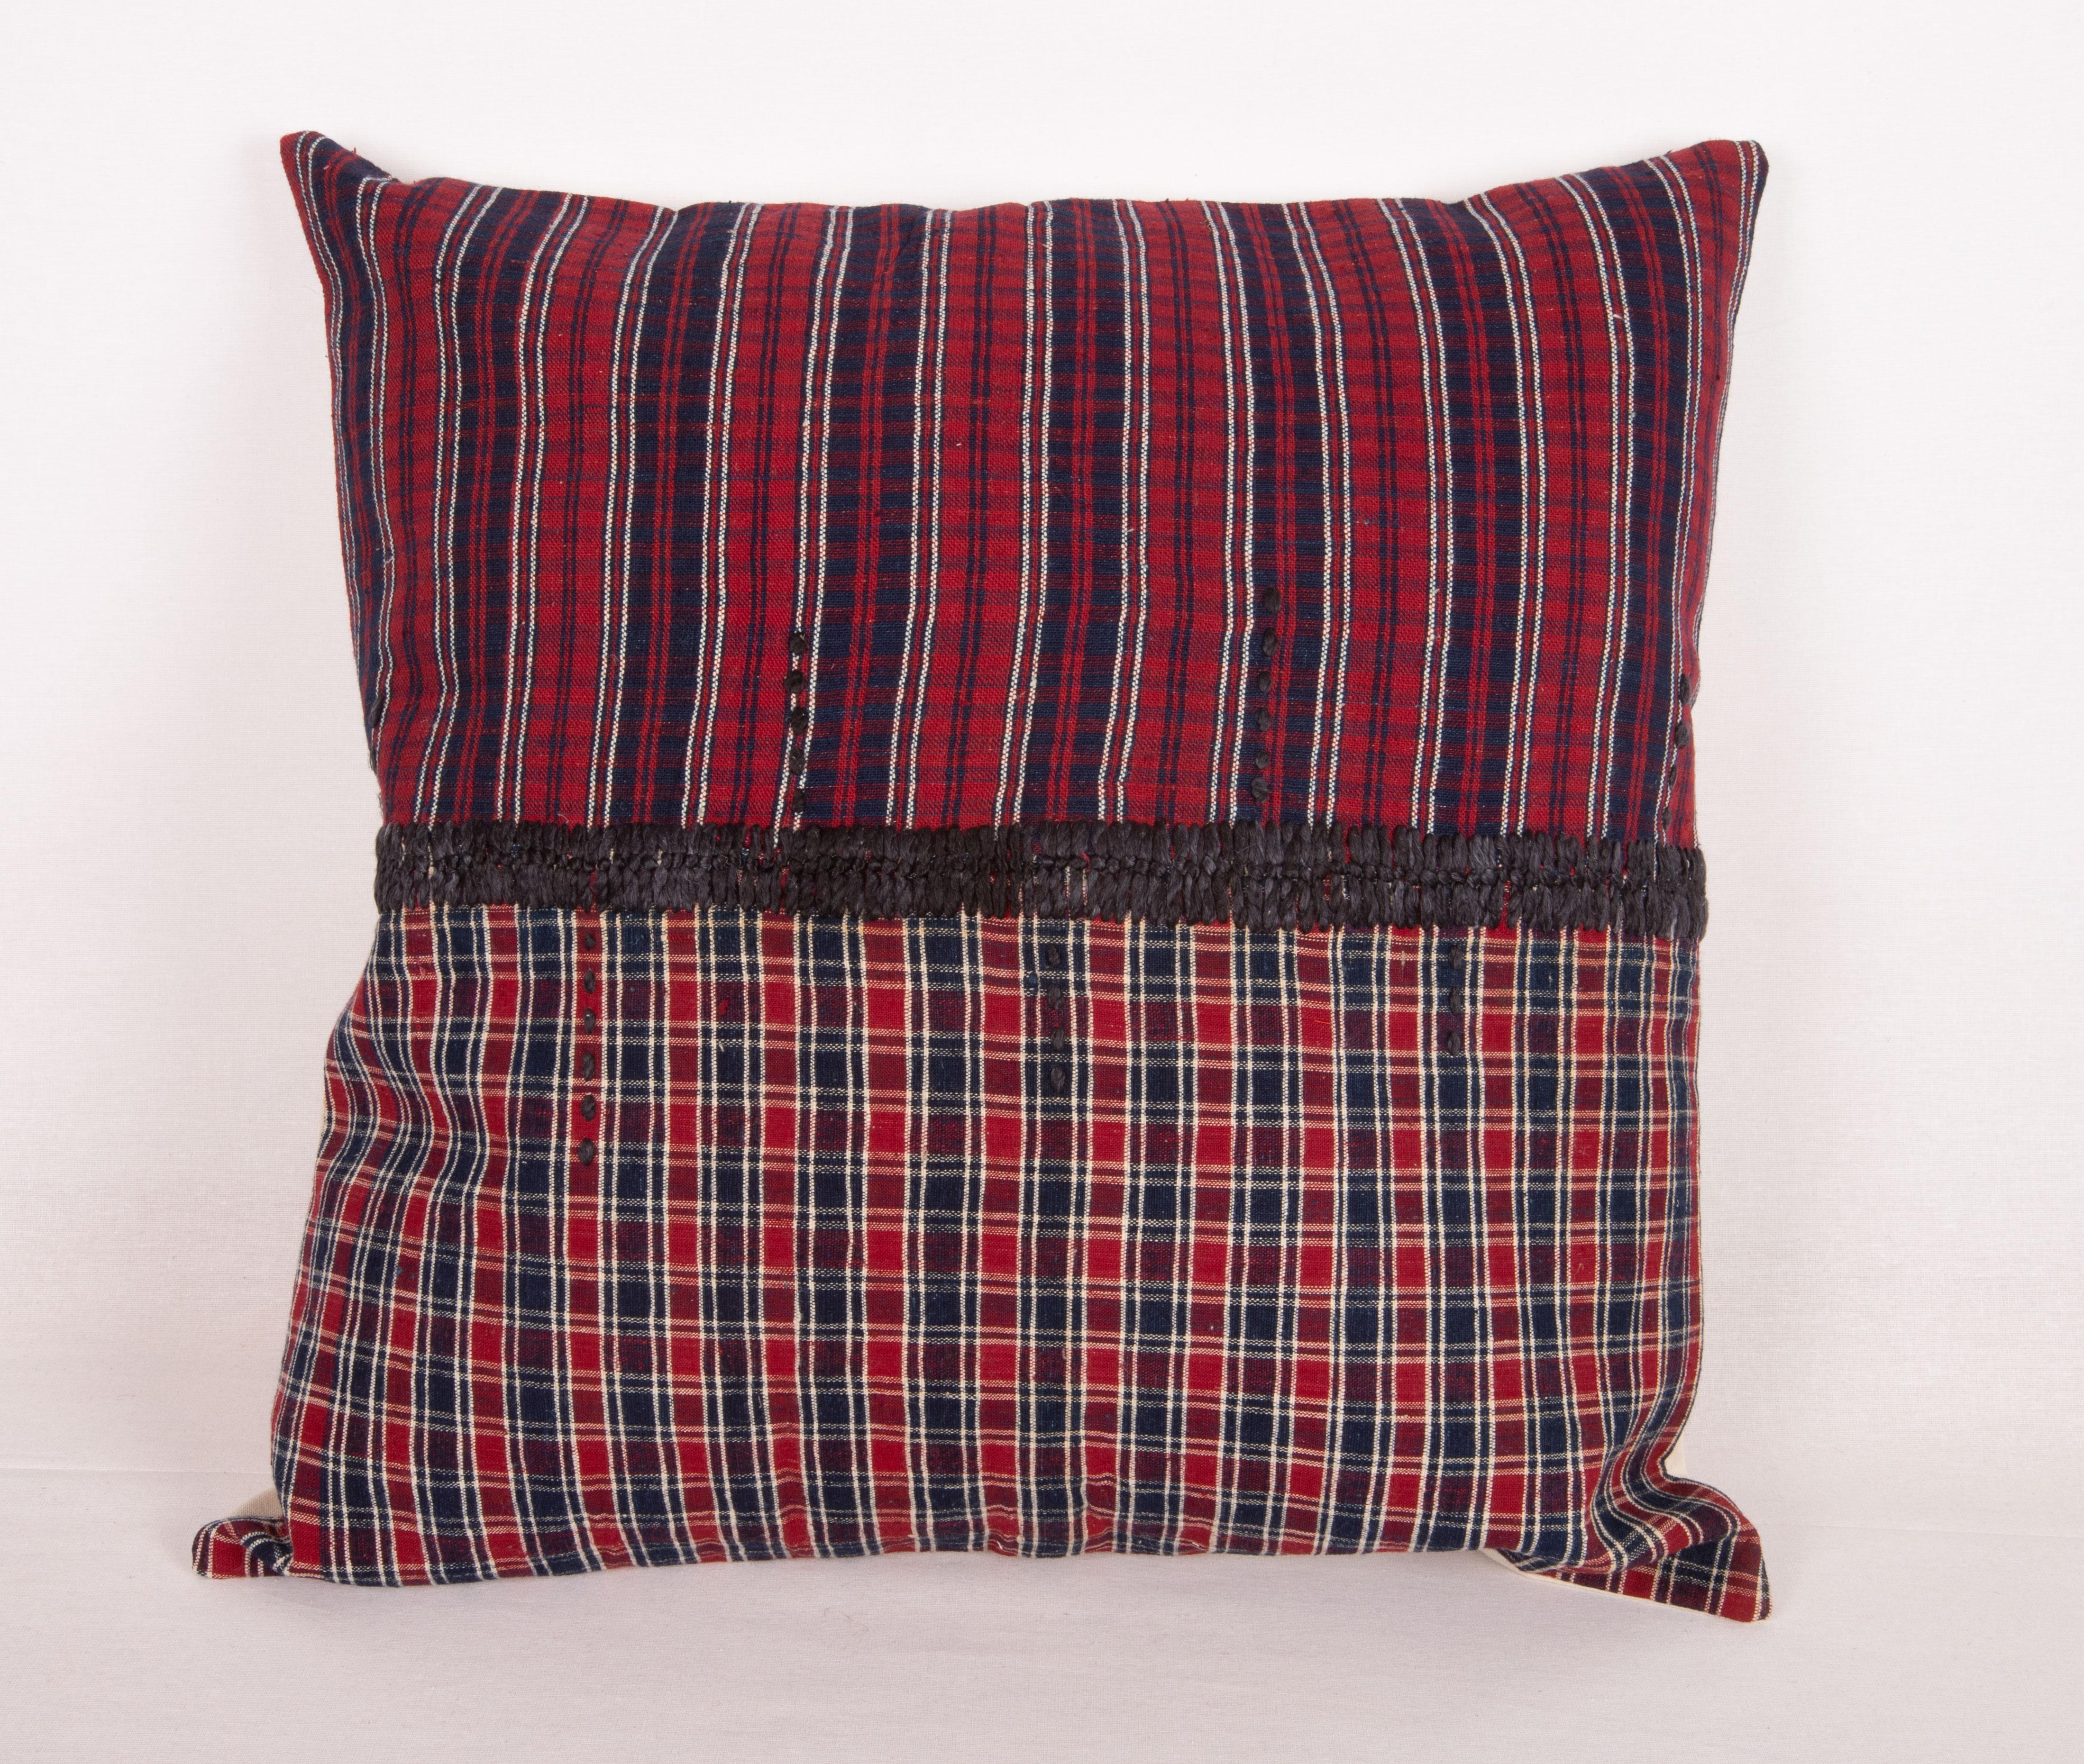 Turkish Rustic Anatolian Pillow Cover, Mid 20th C. For Sale